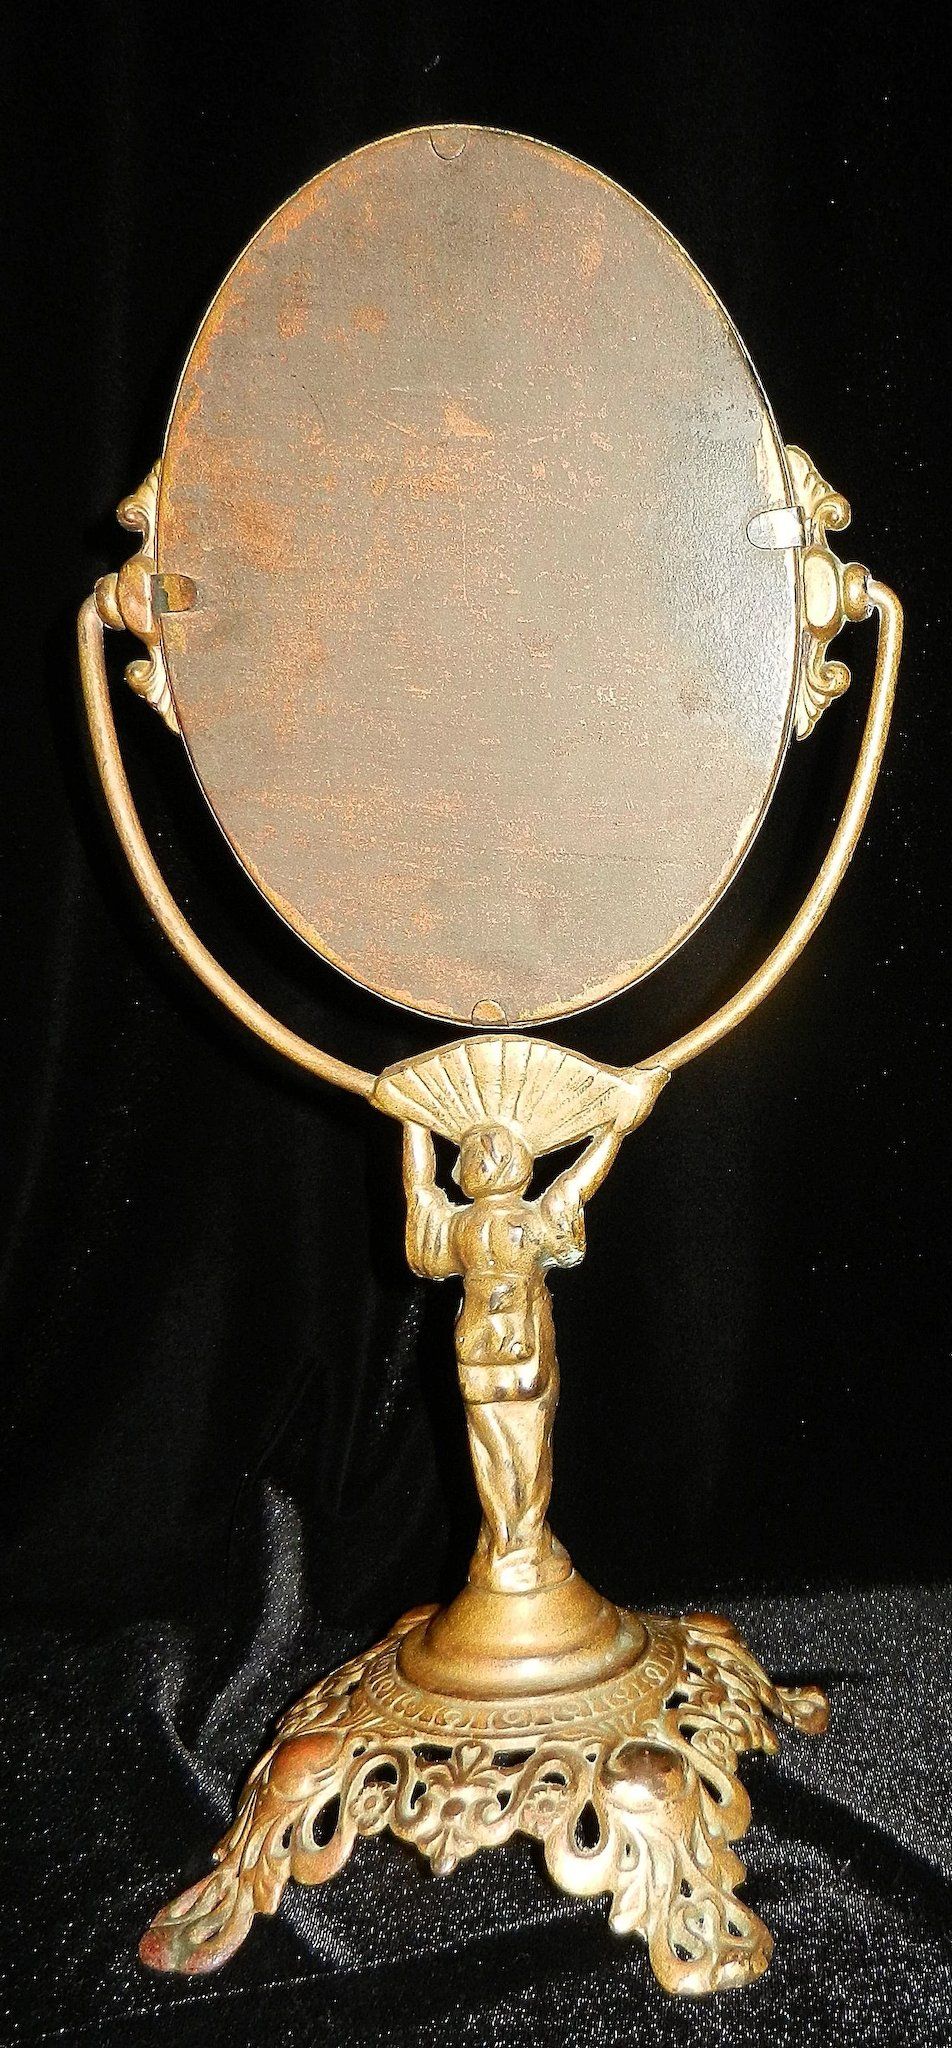 Antique Cast Iron Vanity Mirror With Geisha Girl Base : My Grandmother Within Antique Iron Standing Mirrors (View 9 of 15)